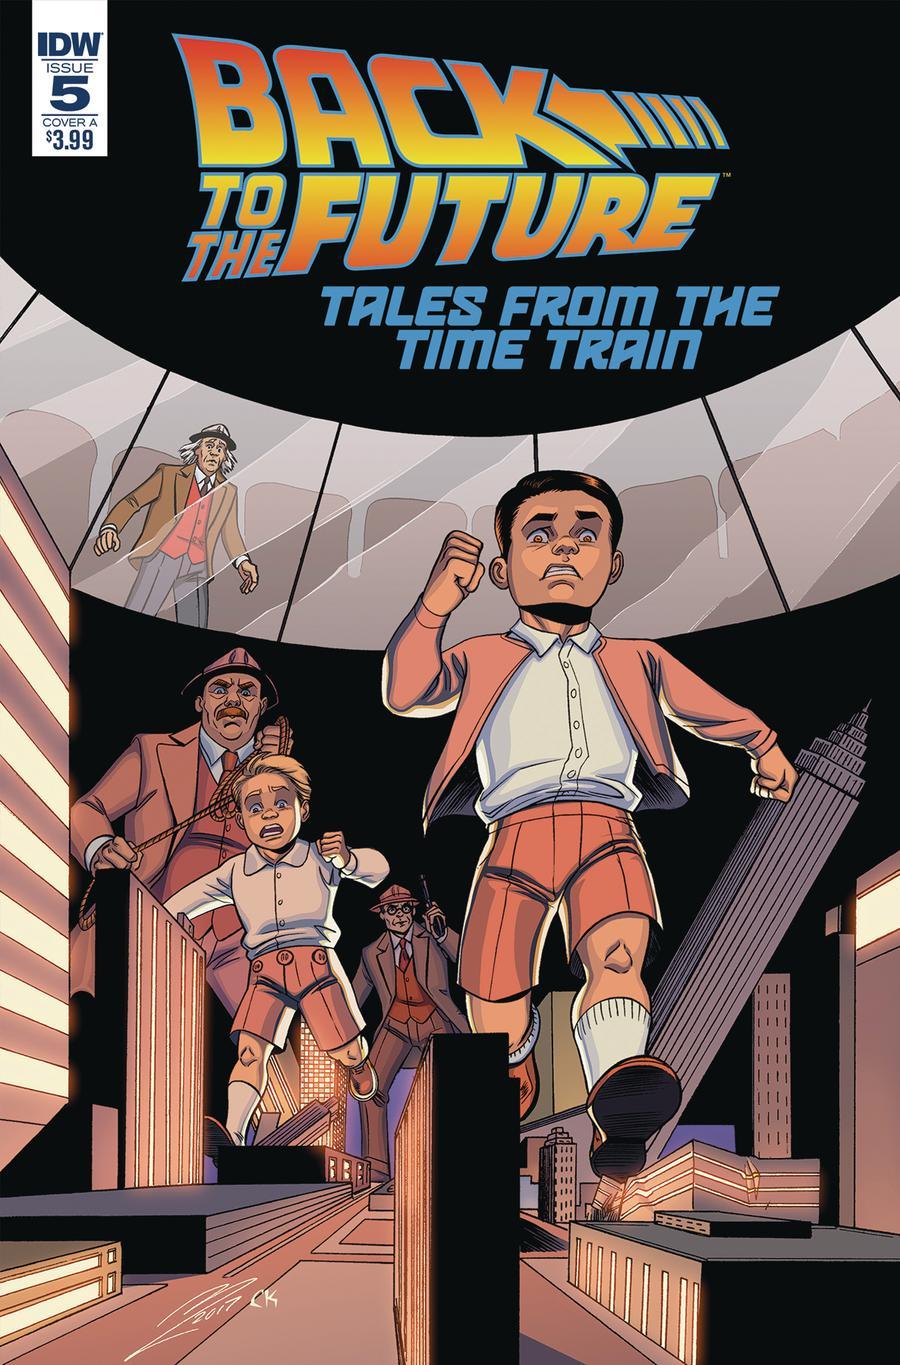 Back To The Future Tales From The Time Train Vol. 1 #5